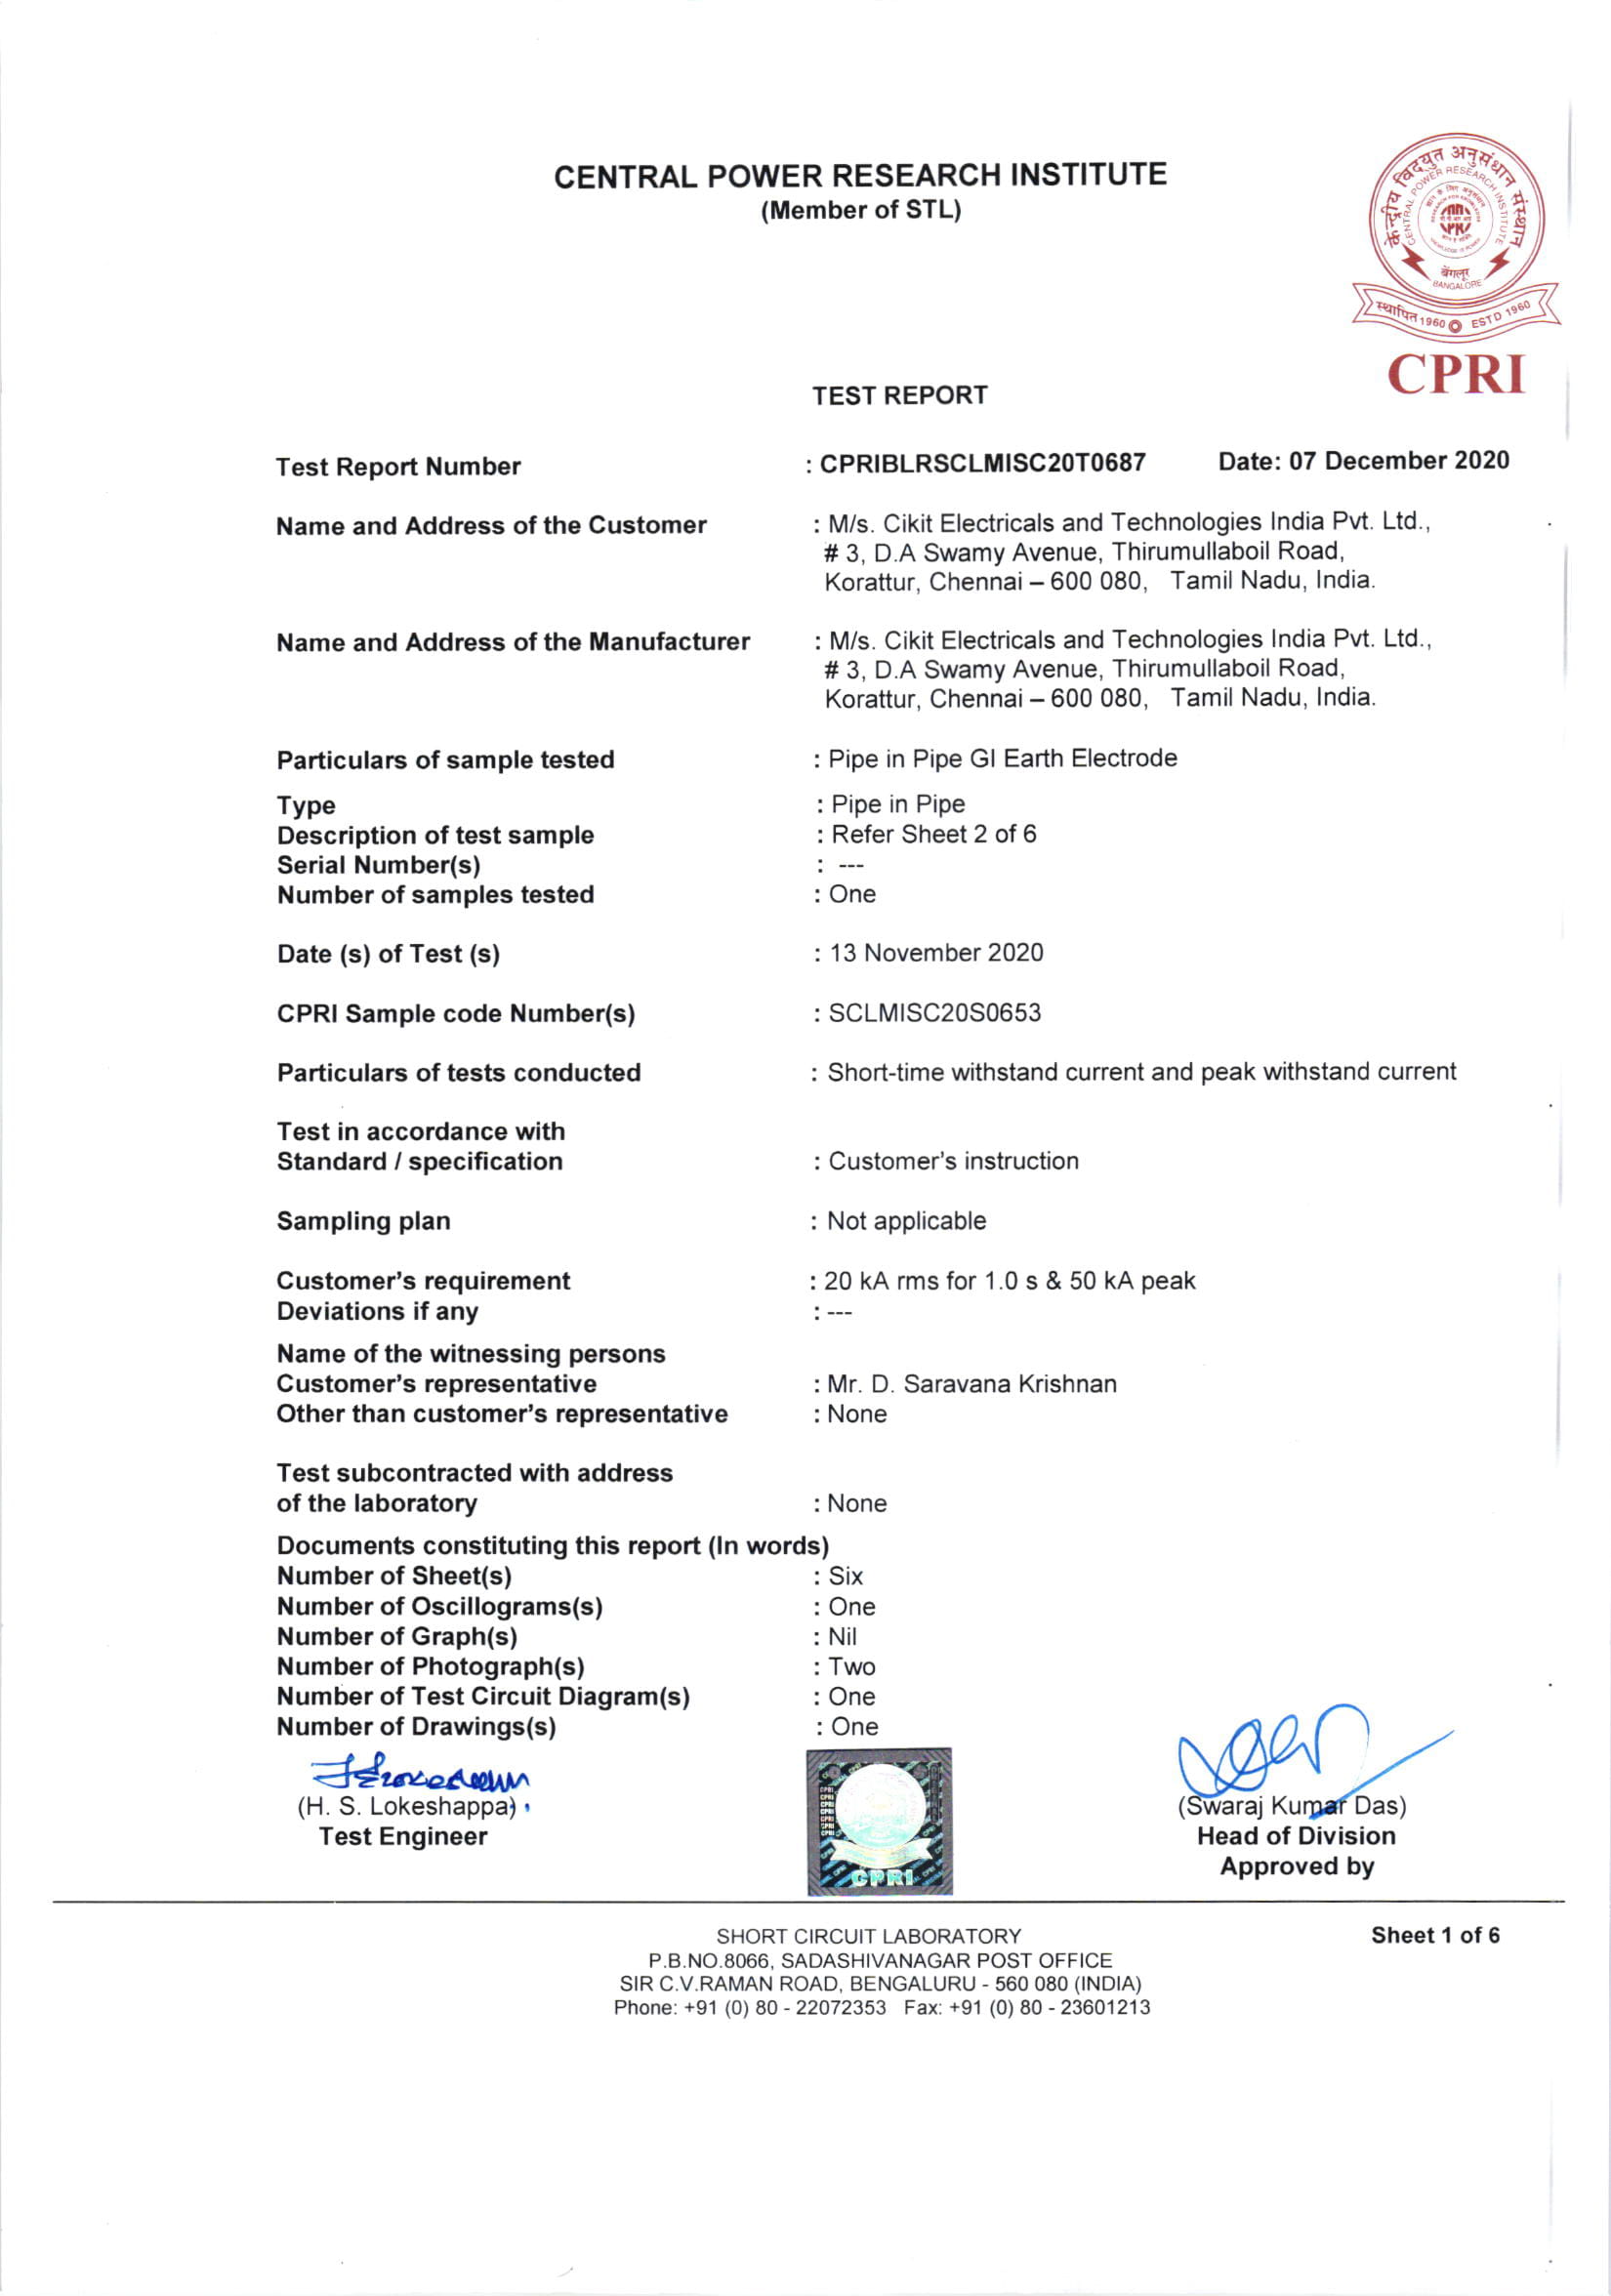 CPRI test report for PIPE IN PIPE 48mm earth electrode.